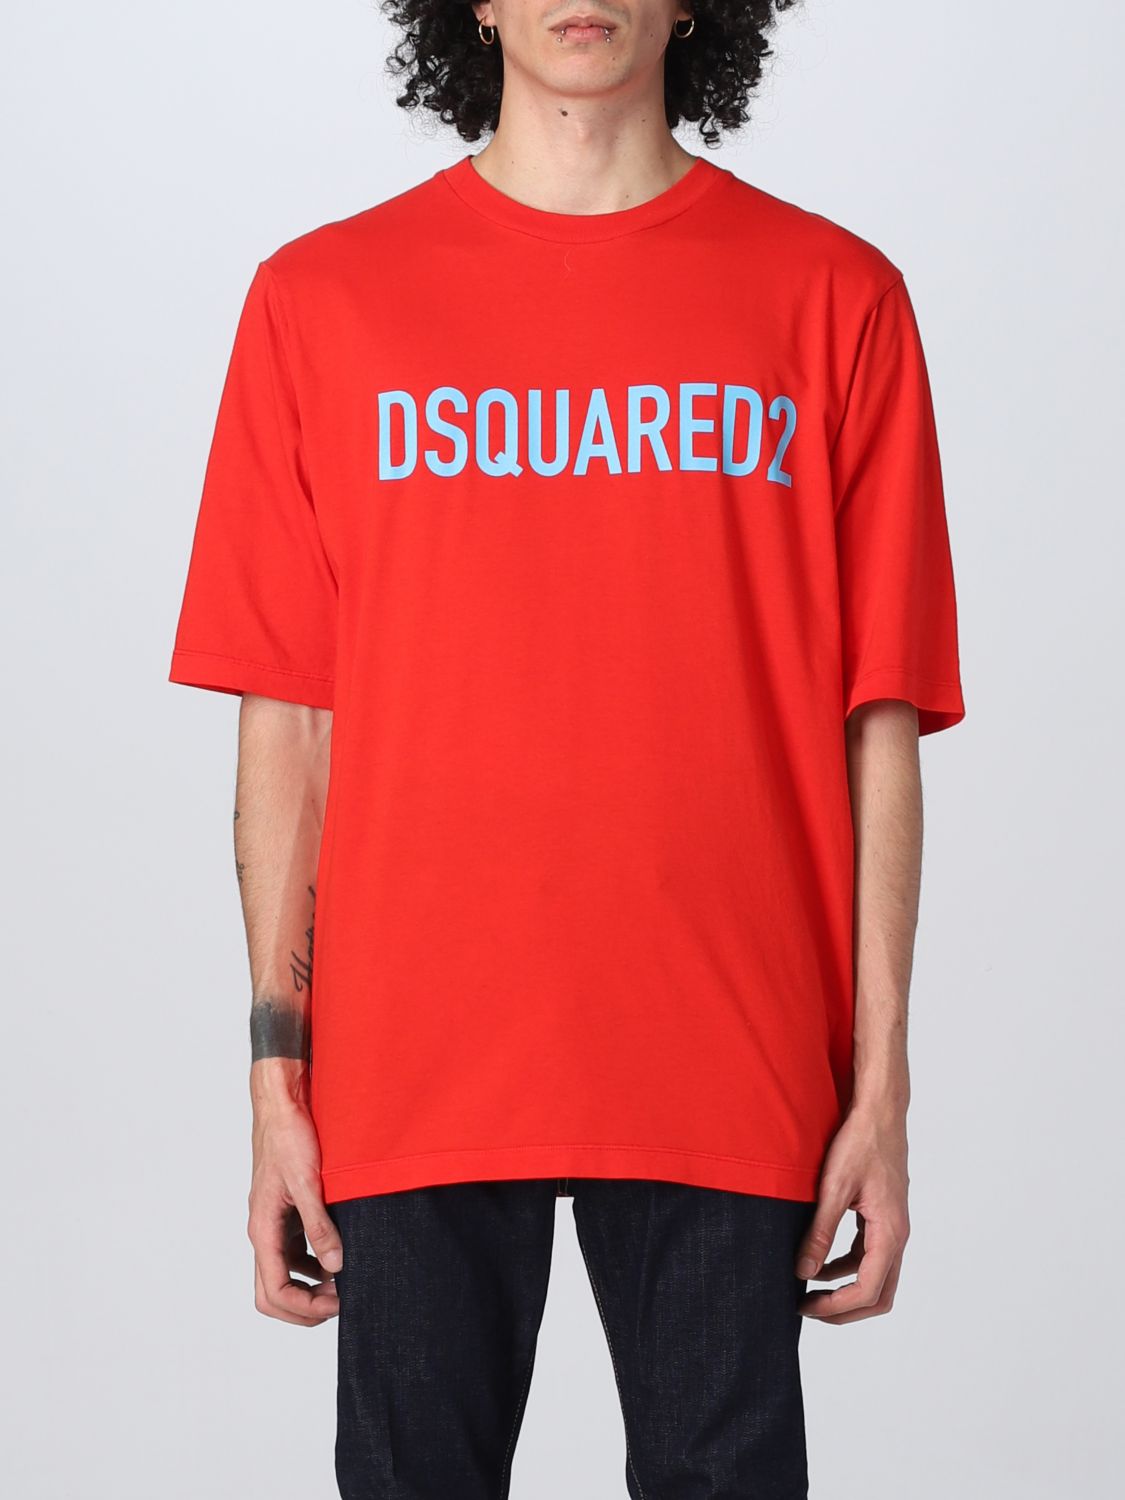 DSQUARED2: T-shirt with logo print - Red | Dsquared2 t-shirt S74GD1122S24321 on